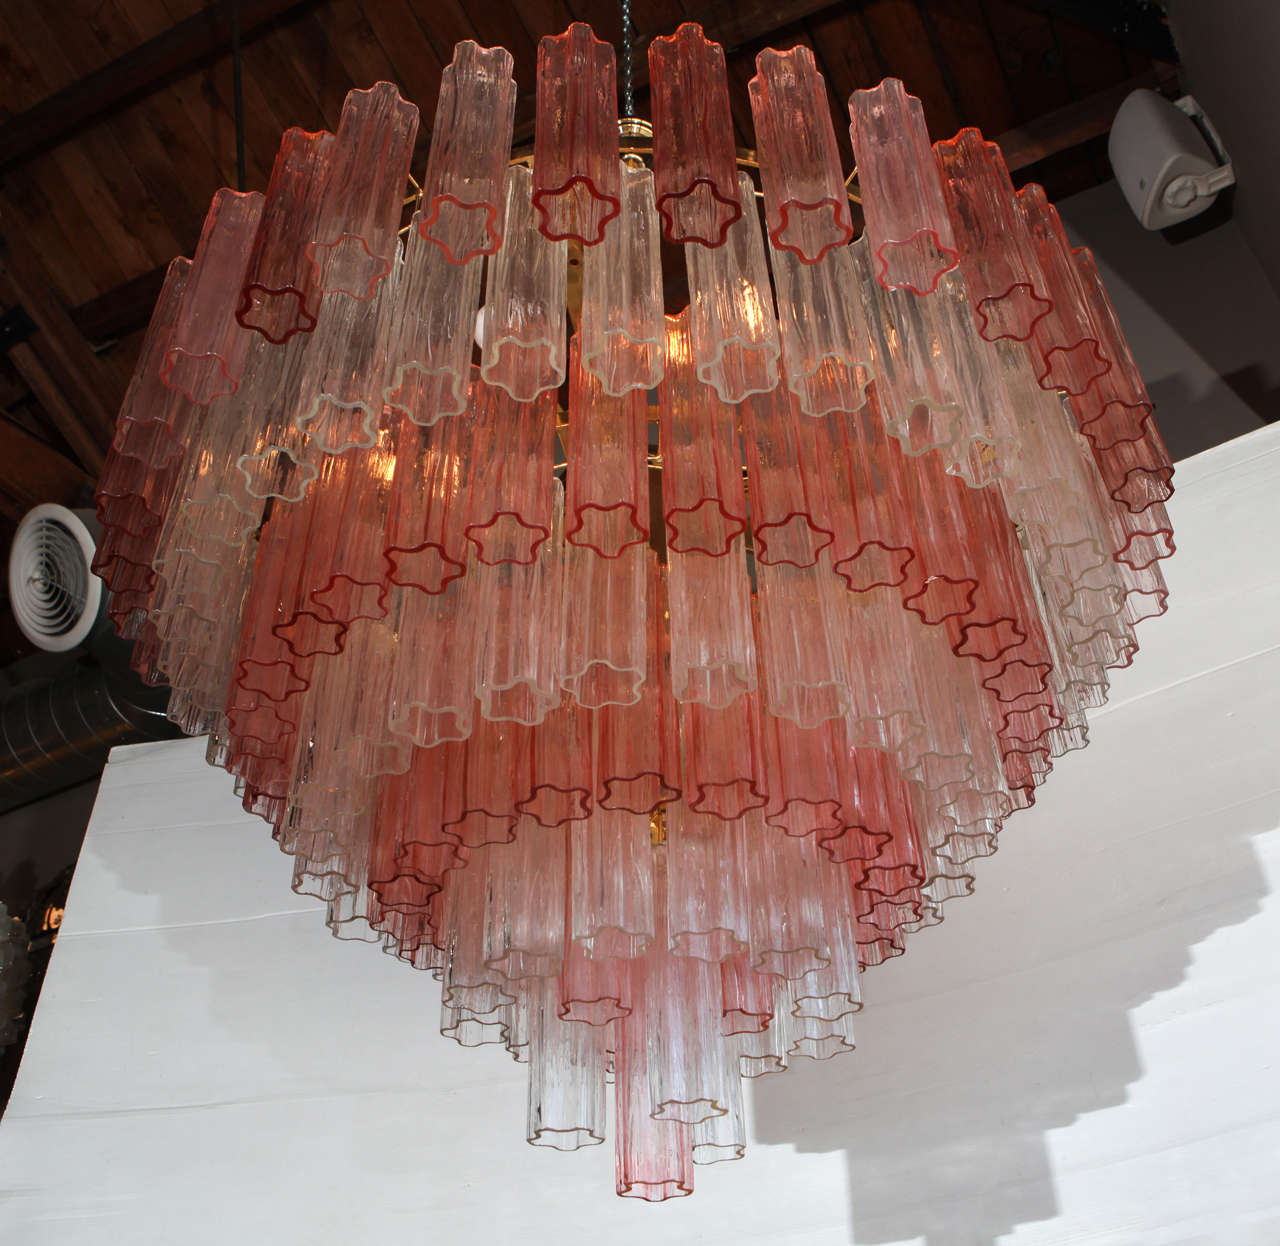 Pair of Elegant Pink and Clear Tronchi Chandeliers in the Style of Venini
Each piece of glass is hand blown, approximately 10